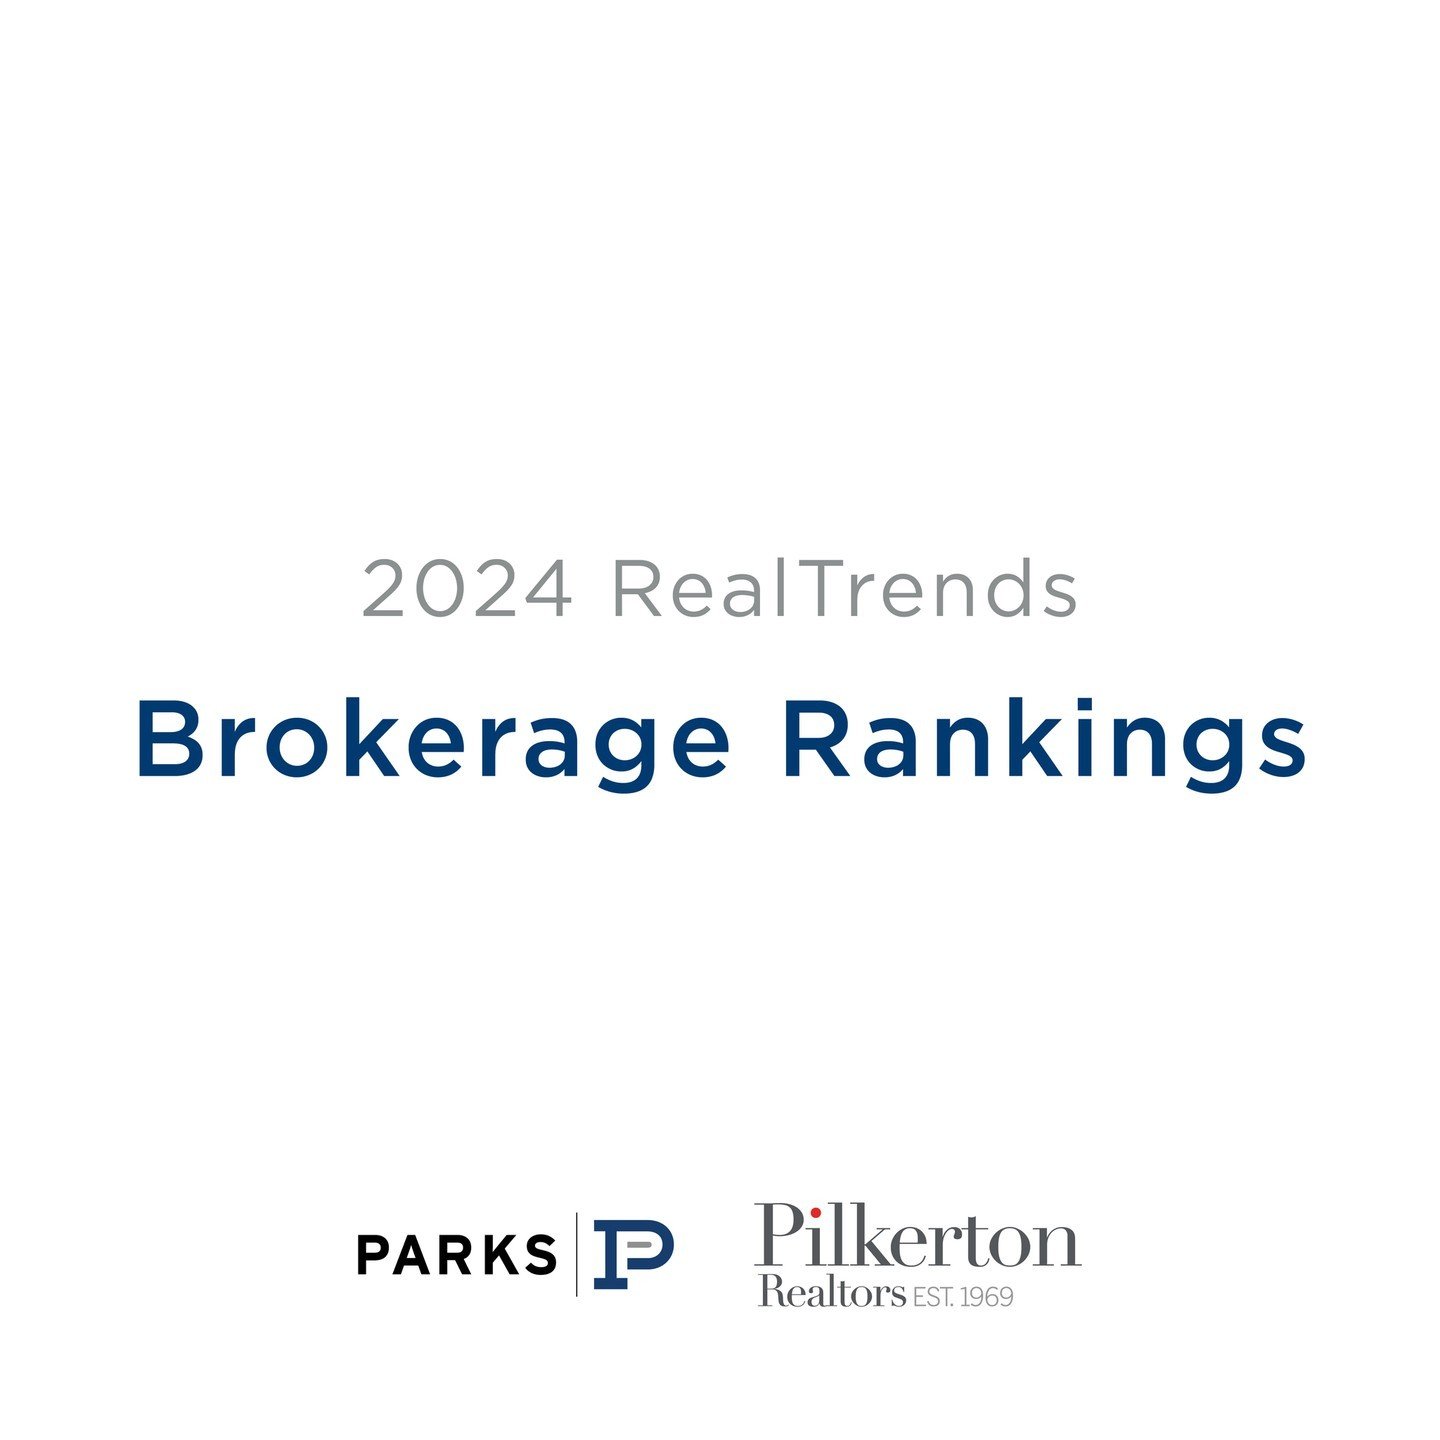 Parks | Pilkerton ranked #1 in the state by sales volume, #26 in the US by sales volume, and #18 independent firm in the US for RealTrends 2024 Brokerage Rankings. 💥👏 @parksathome

*Based on 2023 sales data*